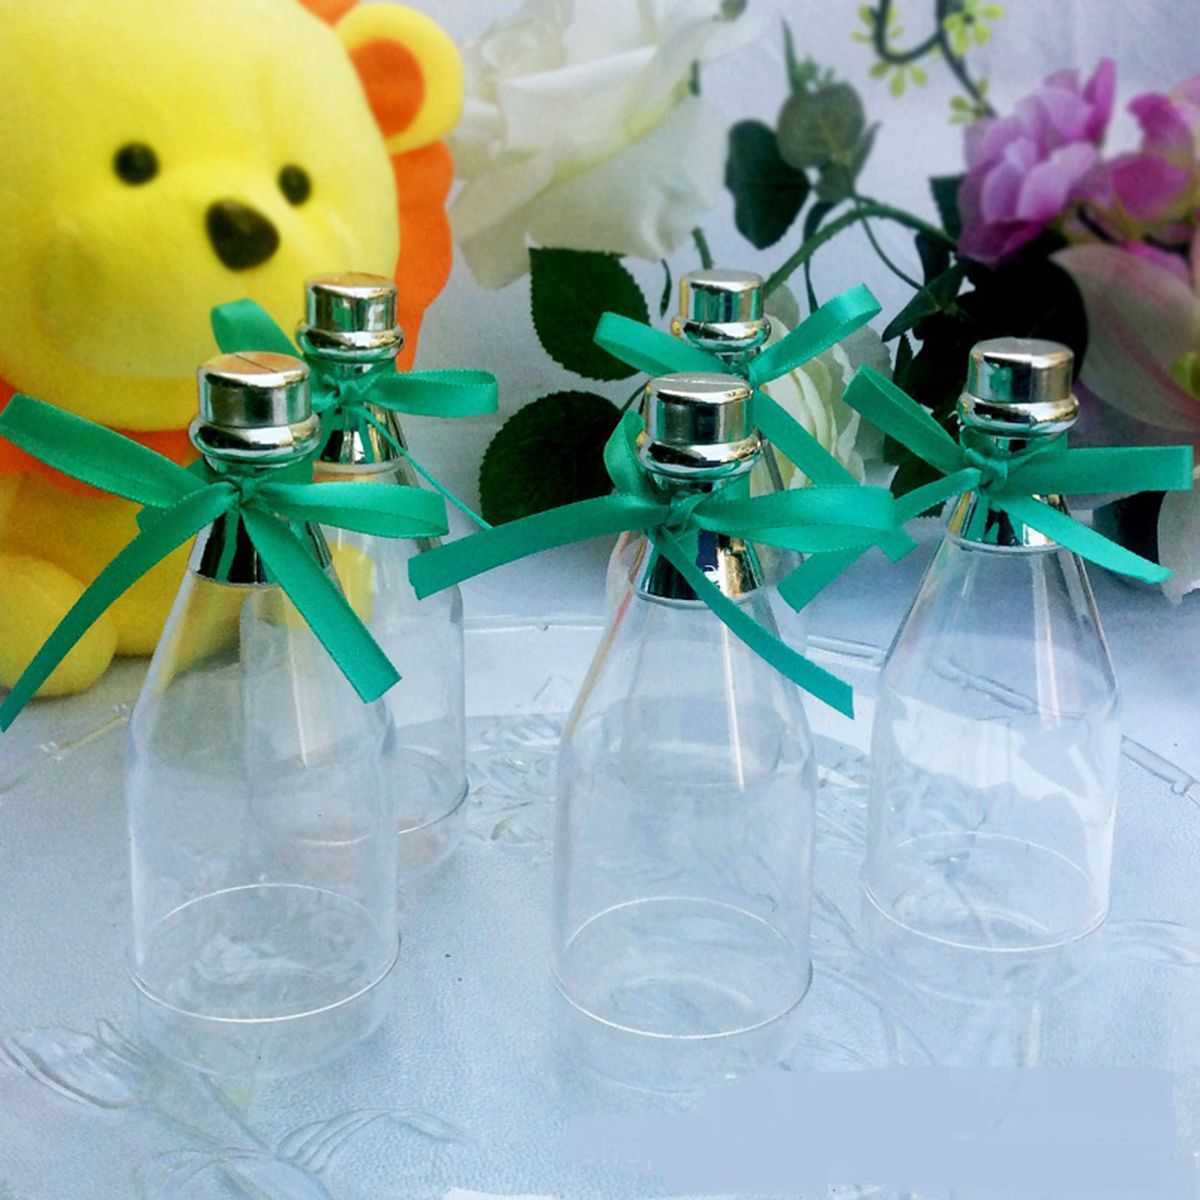 12-Clear-Fillable-Cham-pagne-Bottles-Candy-Boxes-Wedding-Party-Shower-Favors-1473323